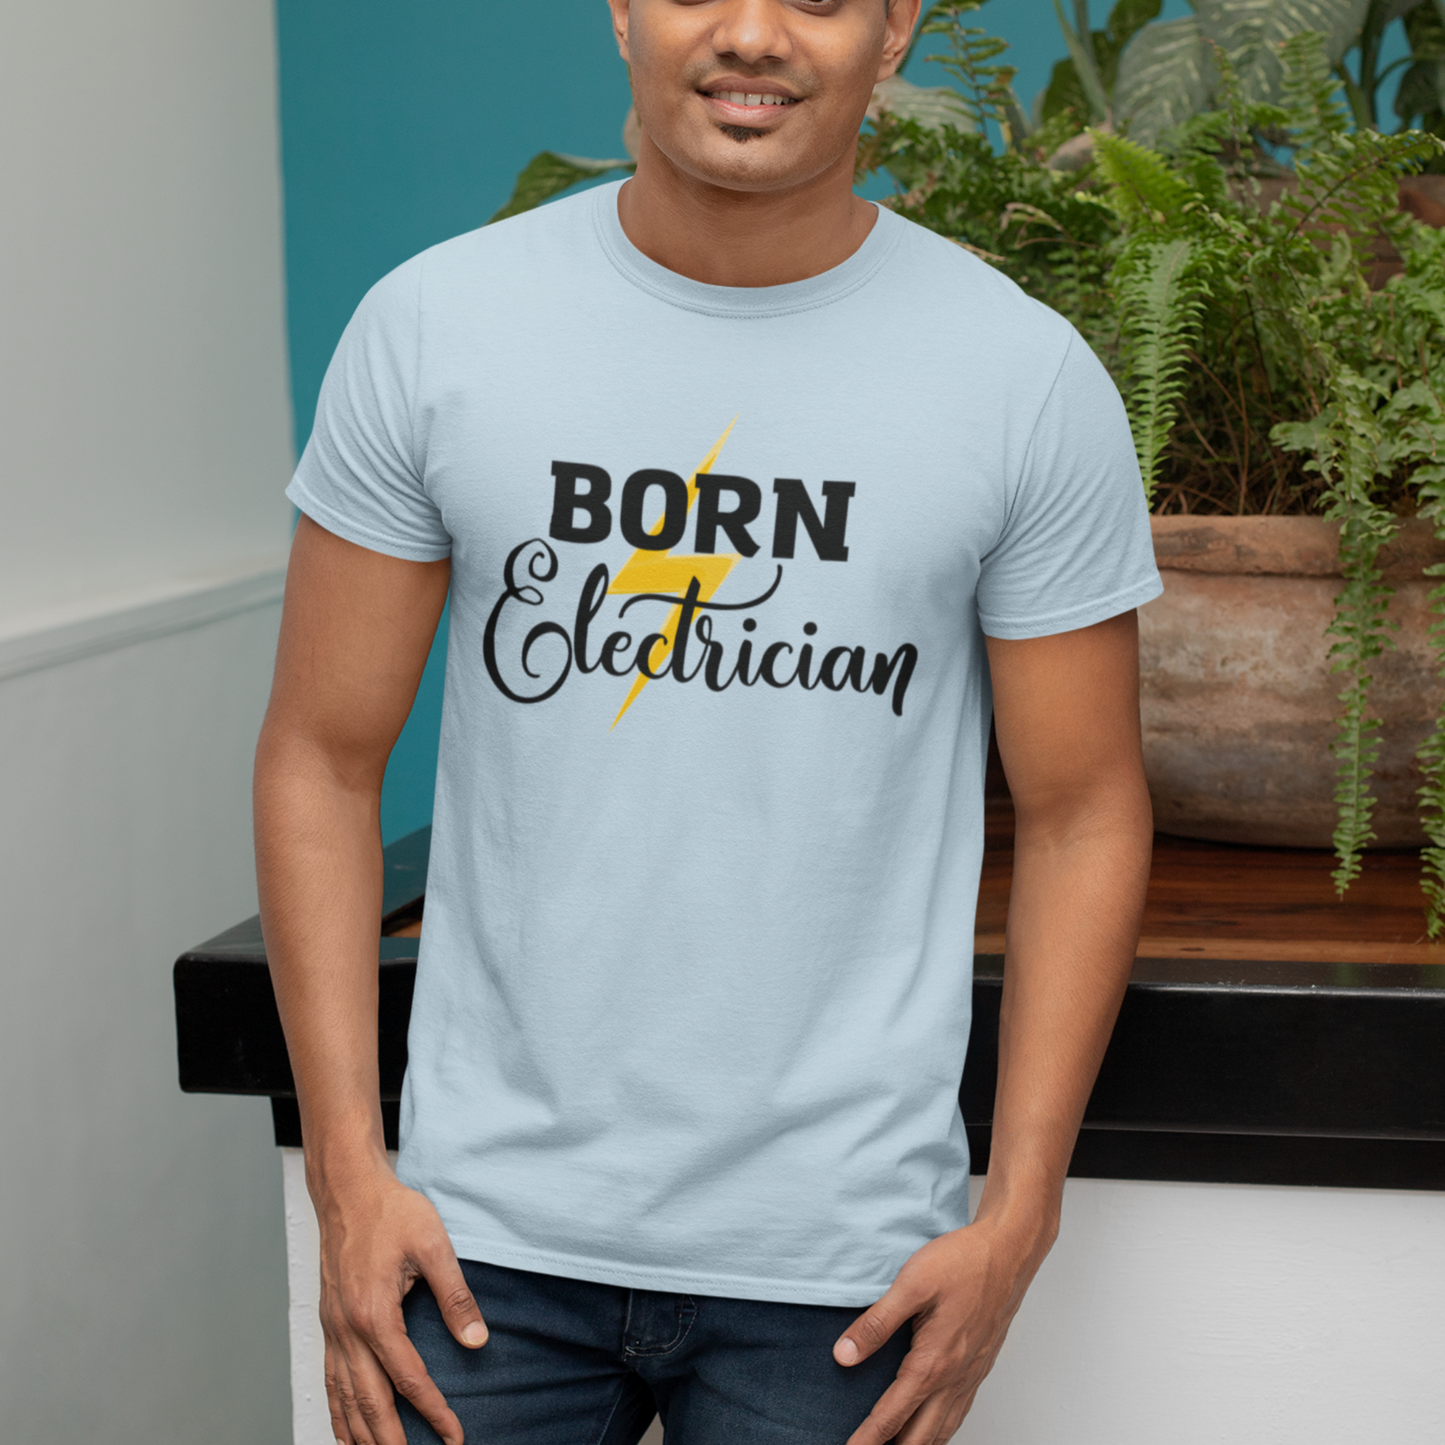 Born Electrician Unisex Tee, Electrician Husband Gift, Electrician Shirt, Electrician Gift, Electrician Shirts, Electrician Dad, Electrician T Shirt, Electrical Engineer Electrical Worker